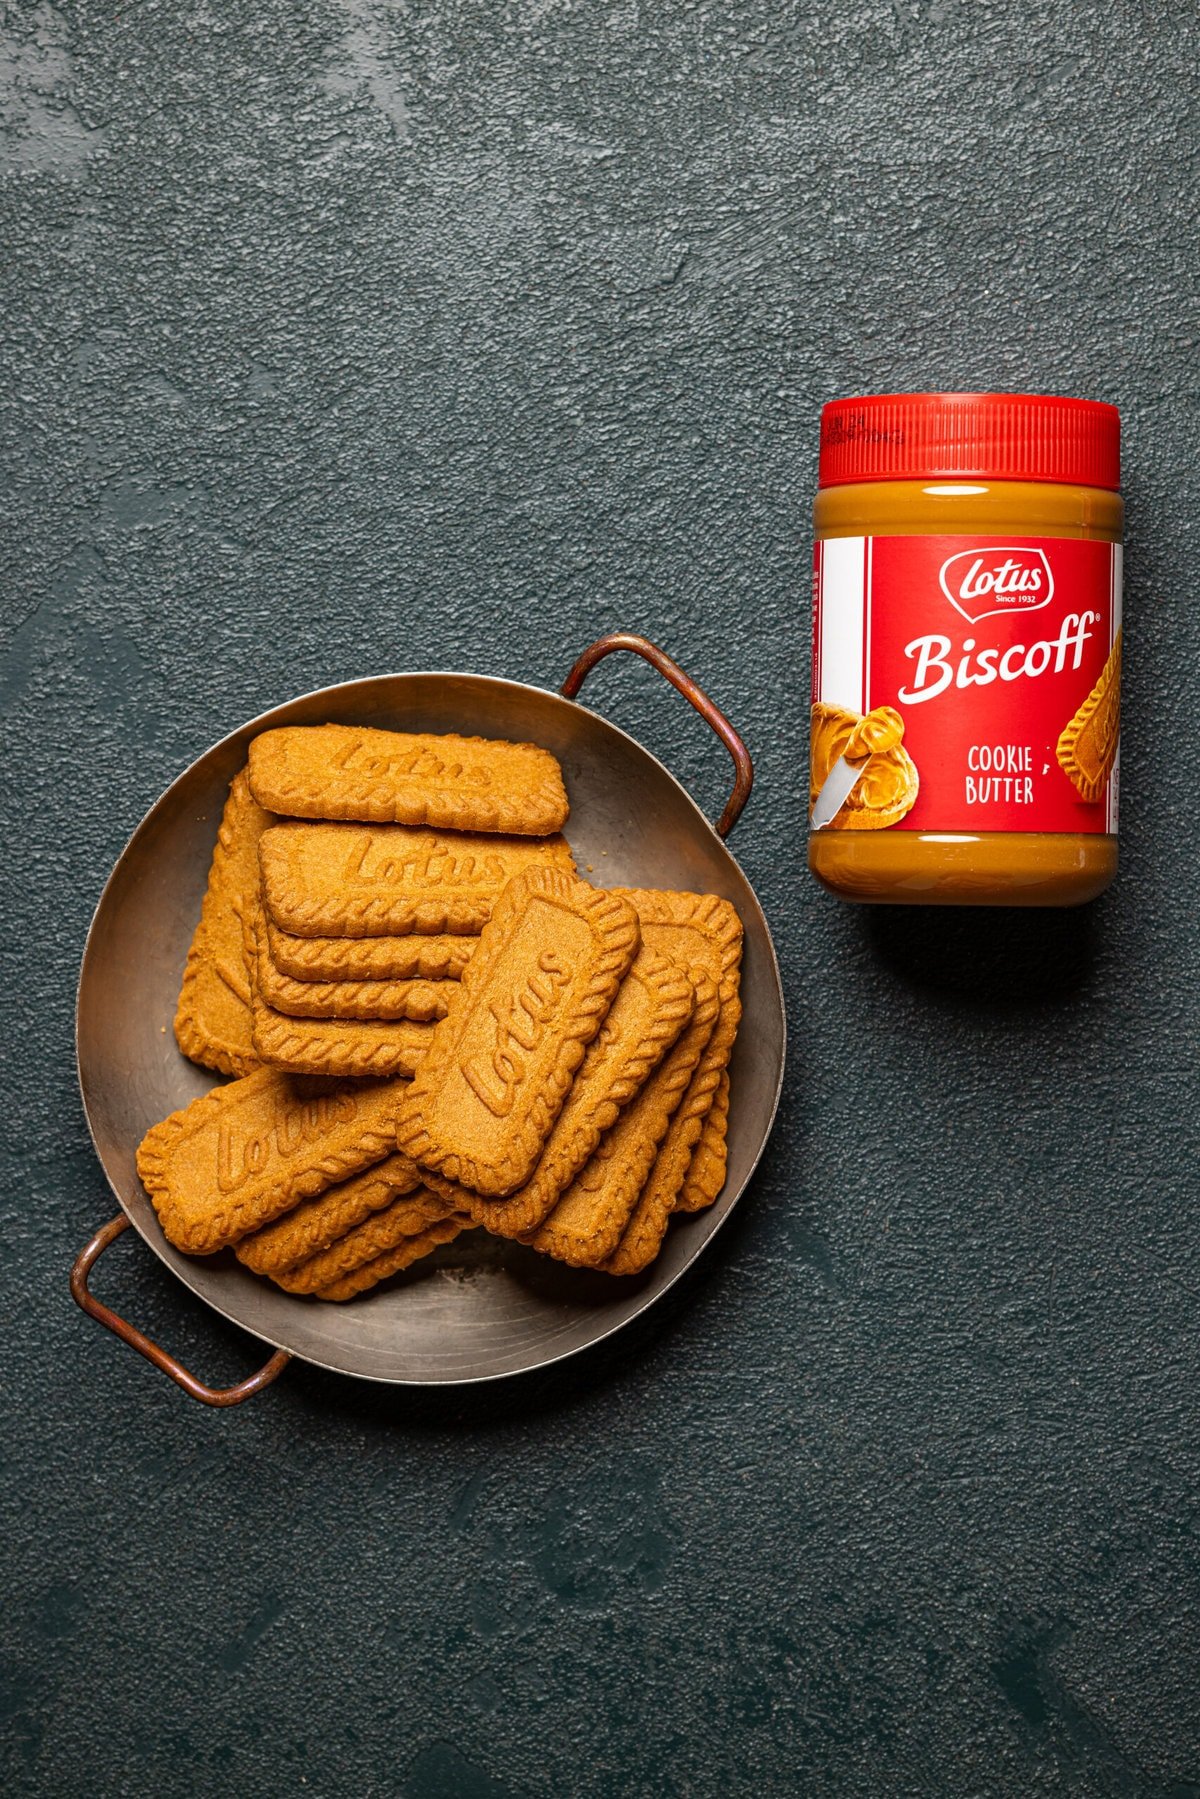 Biscoff cookies and cookie butter on a dark green table.